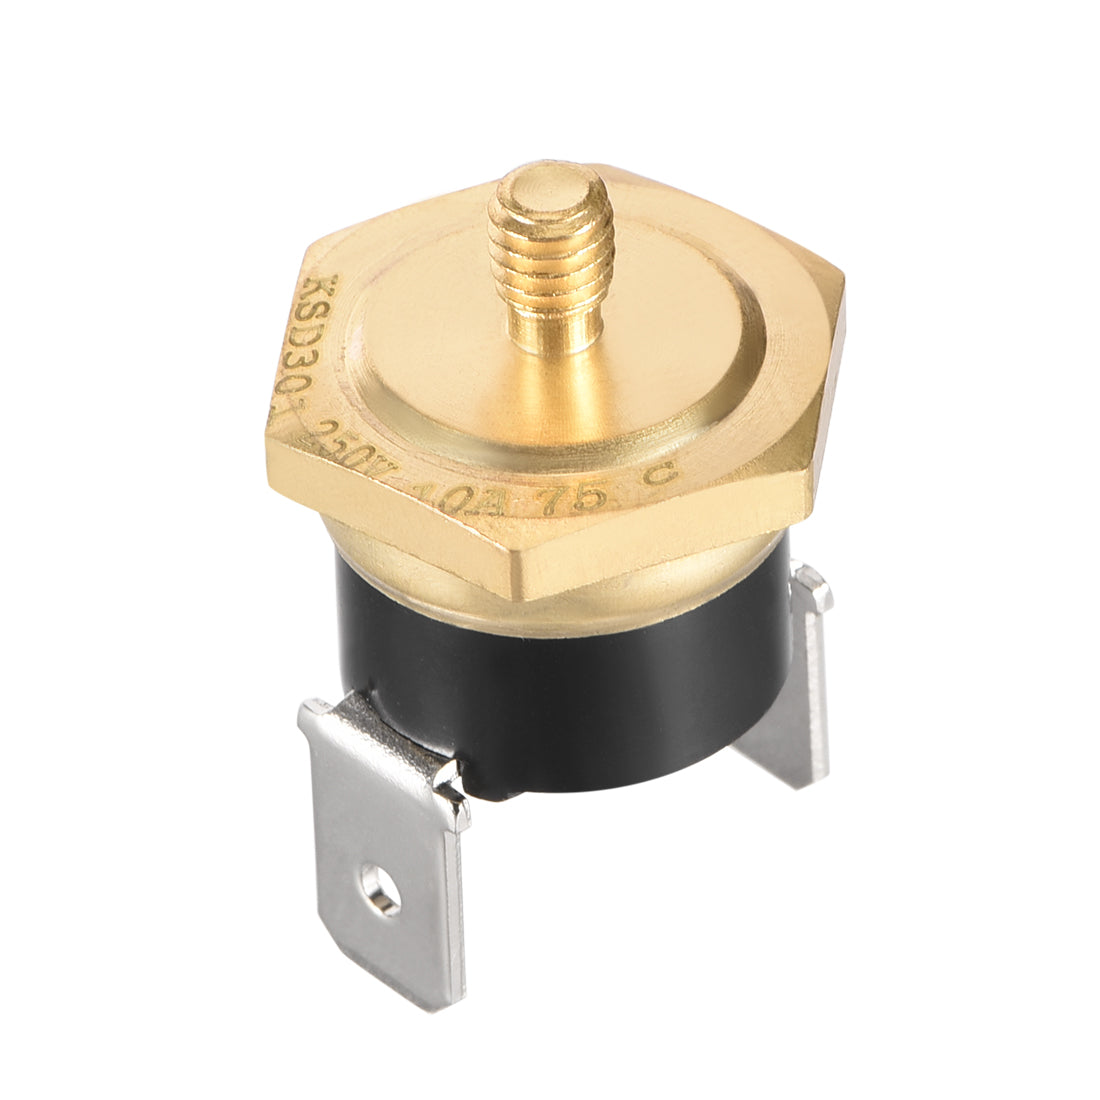 uxcell Uxcell KSD301 Thermostat, Temperature Control Switch 75°C Copper M4 Normally Closed N.C 10A